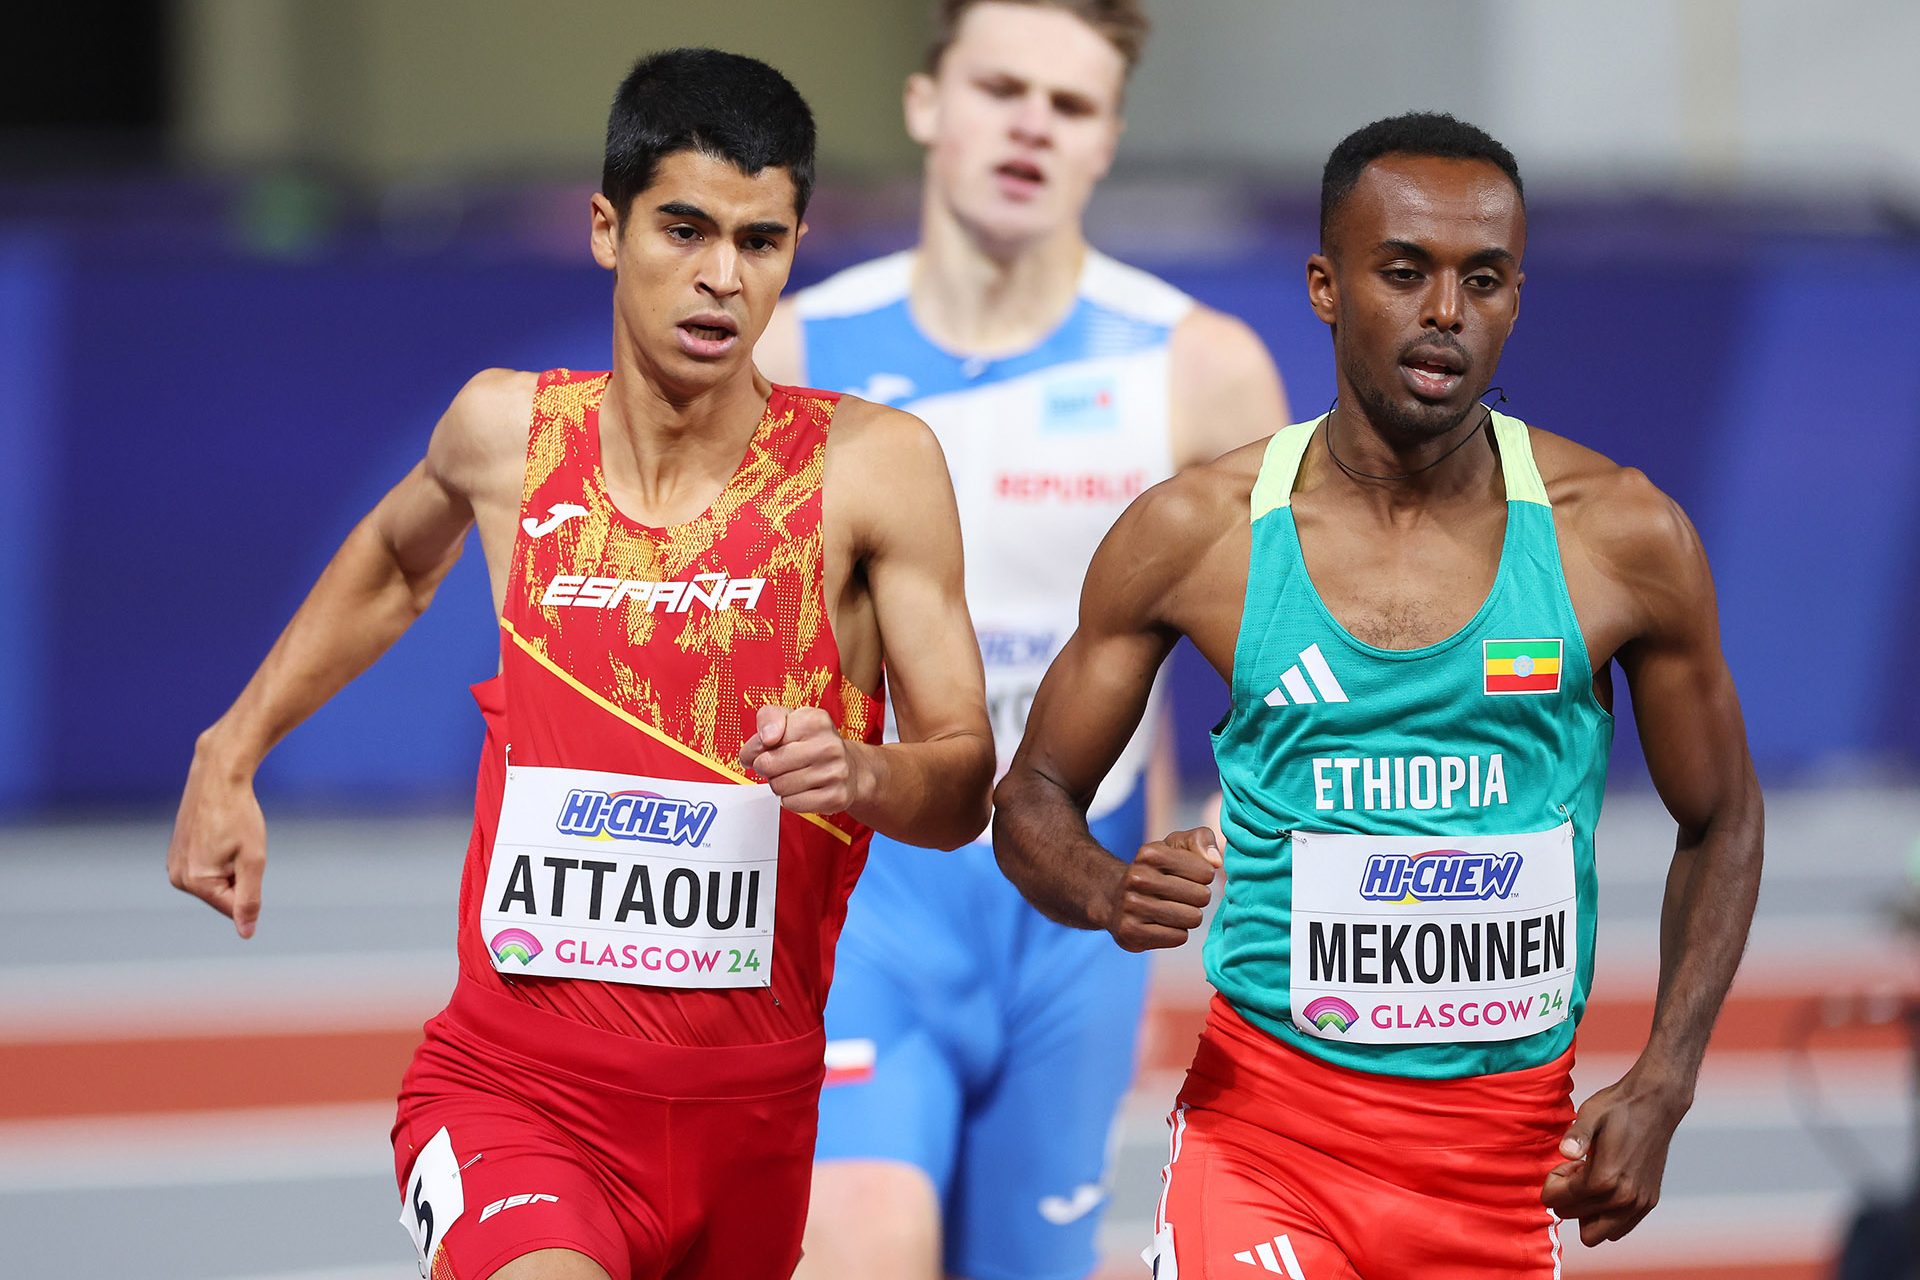 Mohamed Attaoui (atletismo)